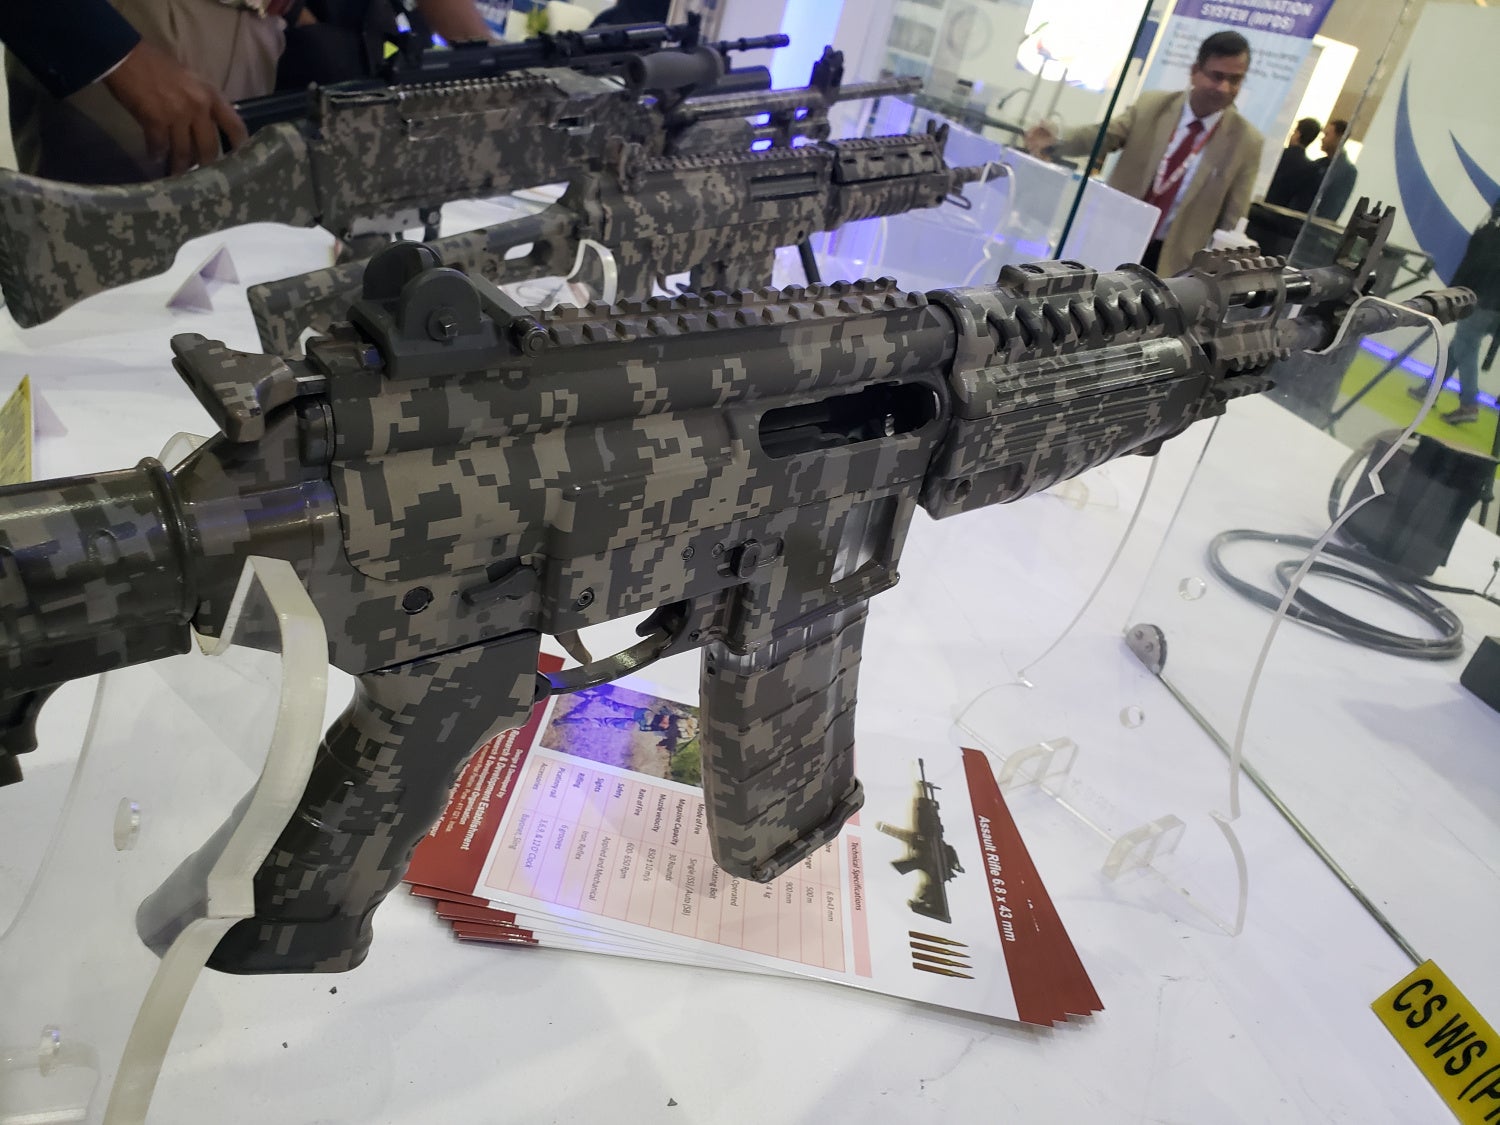 6.8 SPC assault rifle - right side